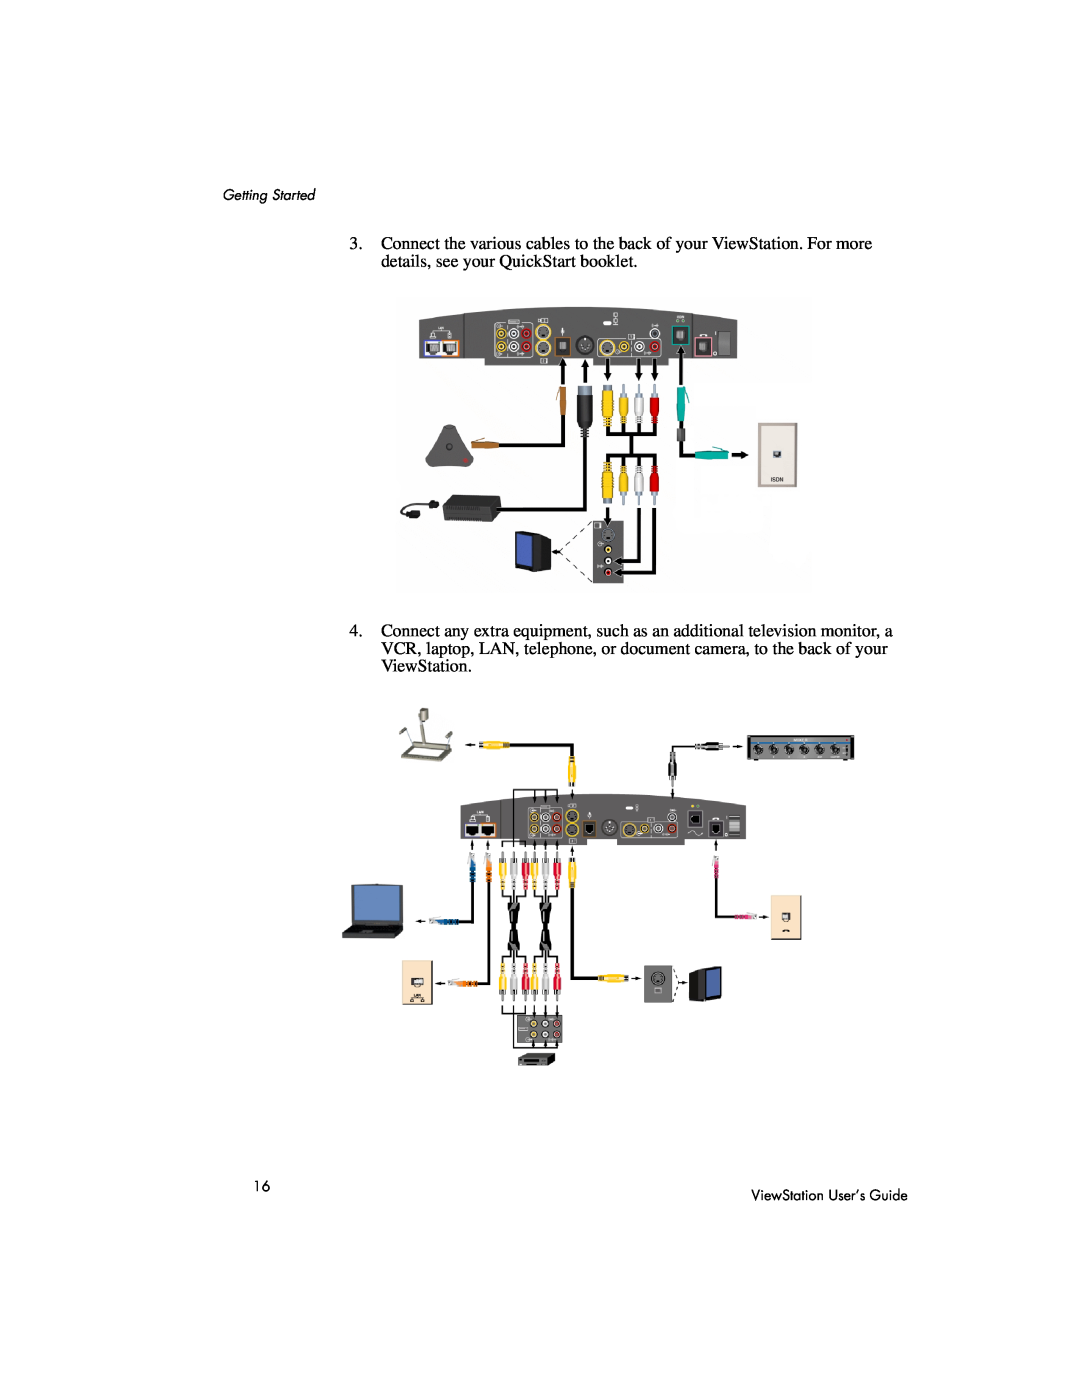 Polycom 512, 128 Connect the various cables to the back of your ViewStation. For more details, see your QuickStart booklet 